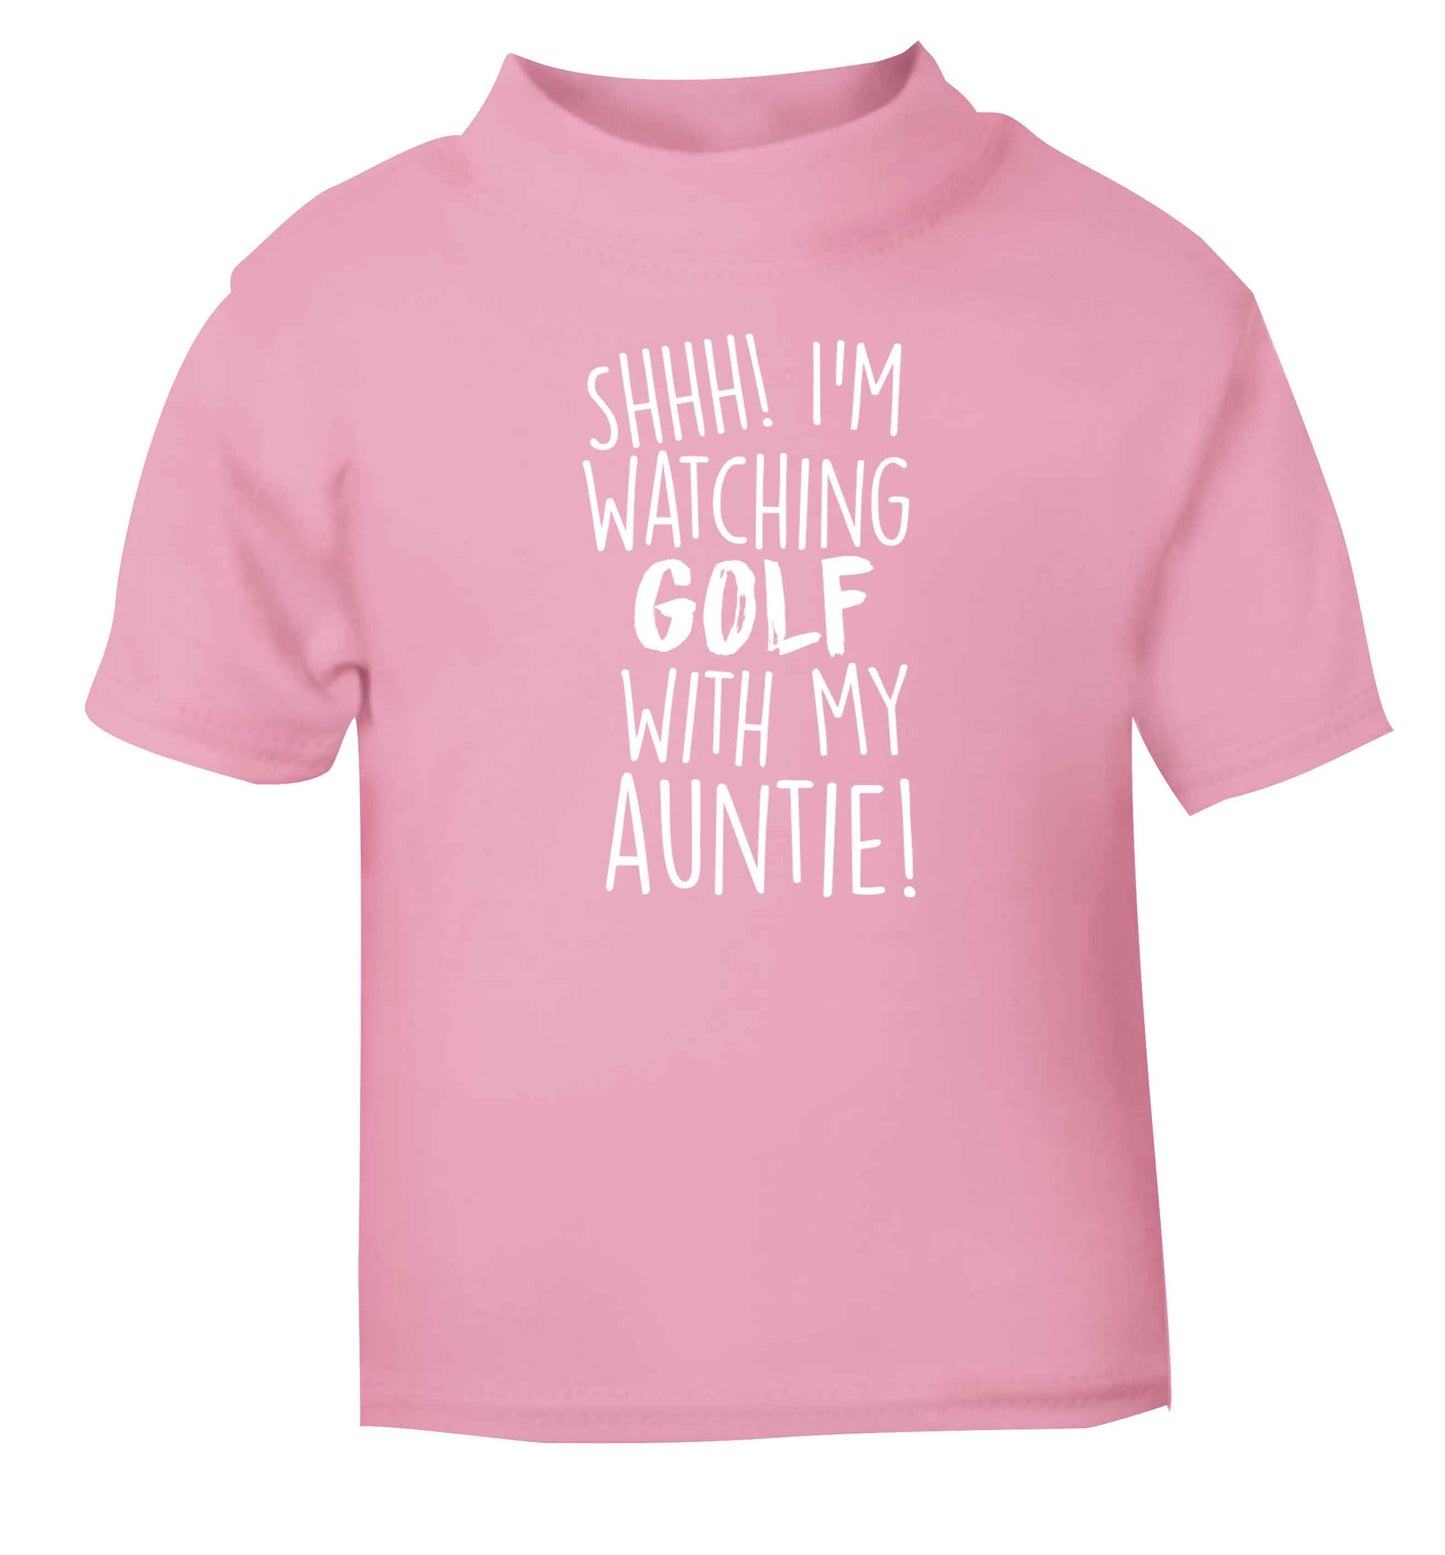 Shh I'm watching golf with my auntie light pink Baby Toddler Tshirt 2 Years